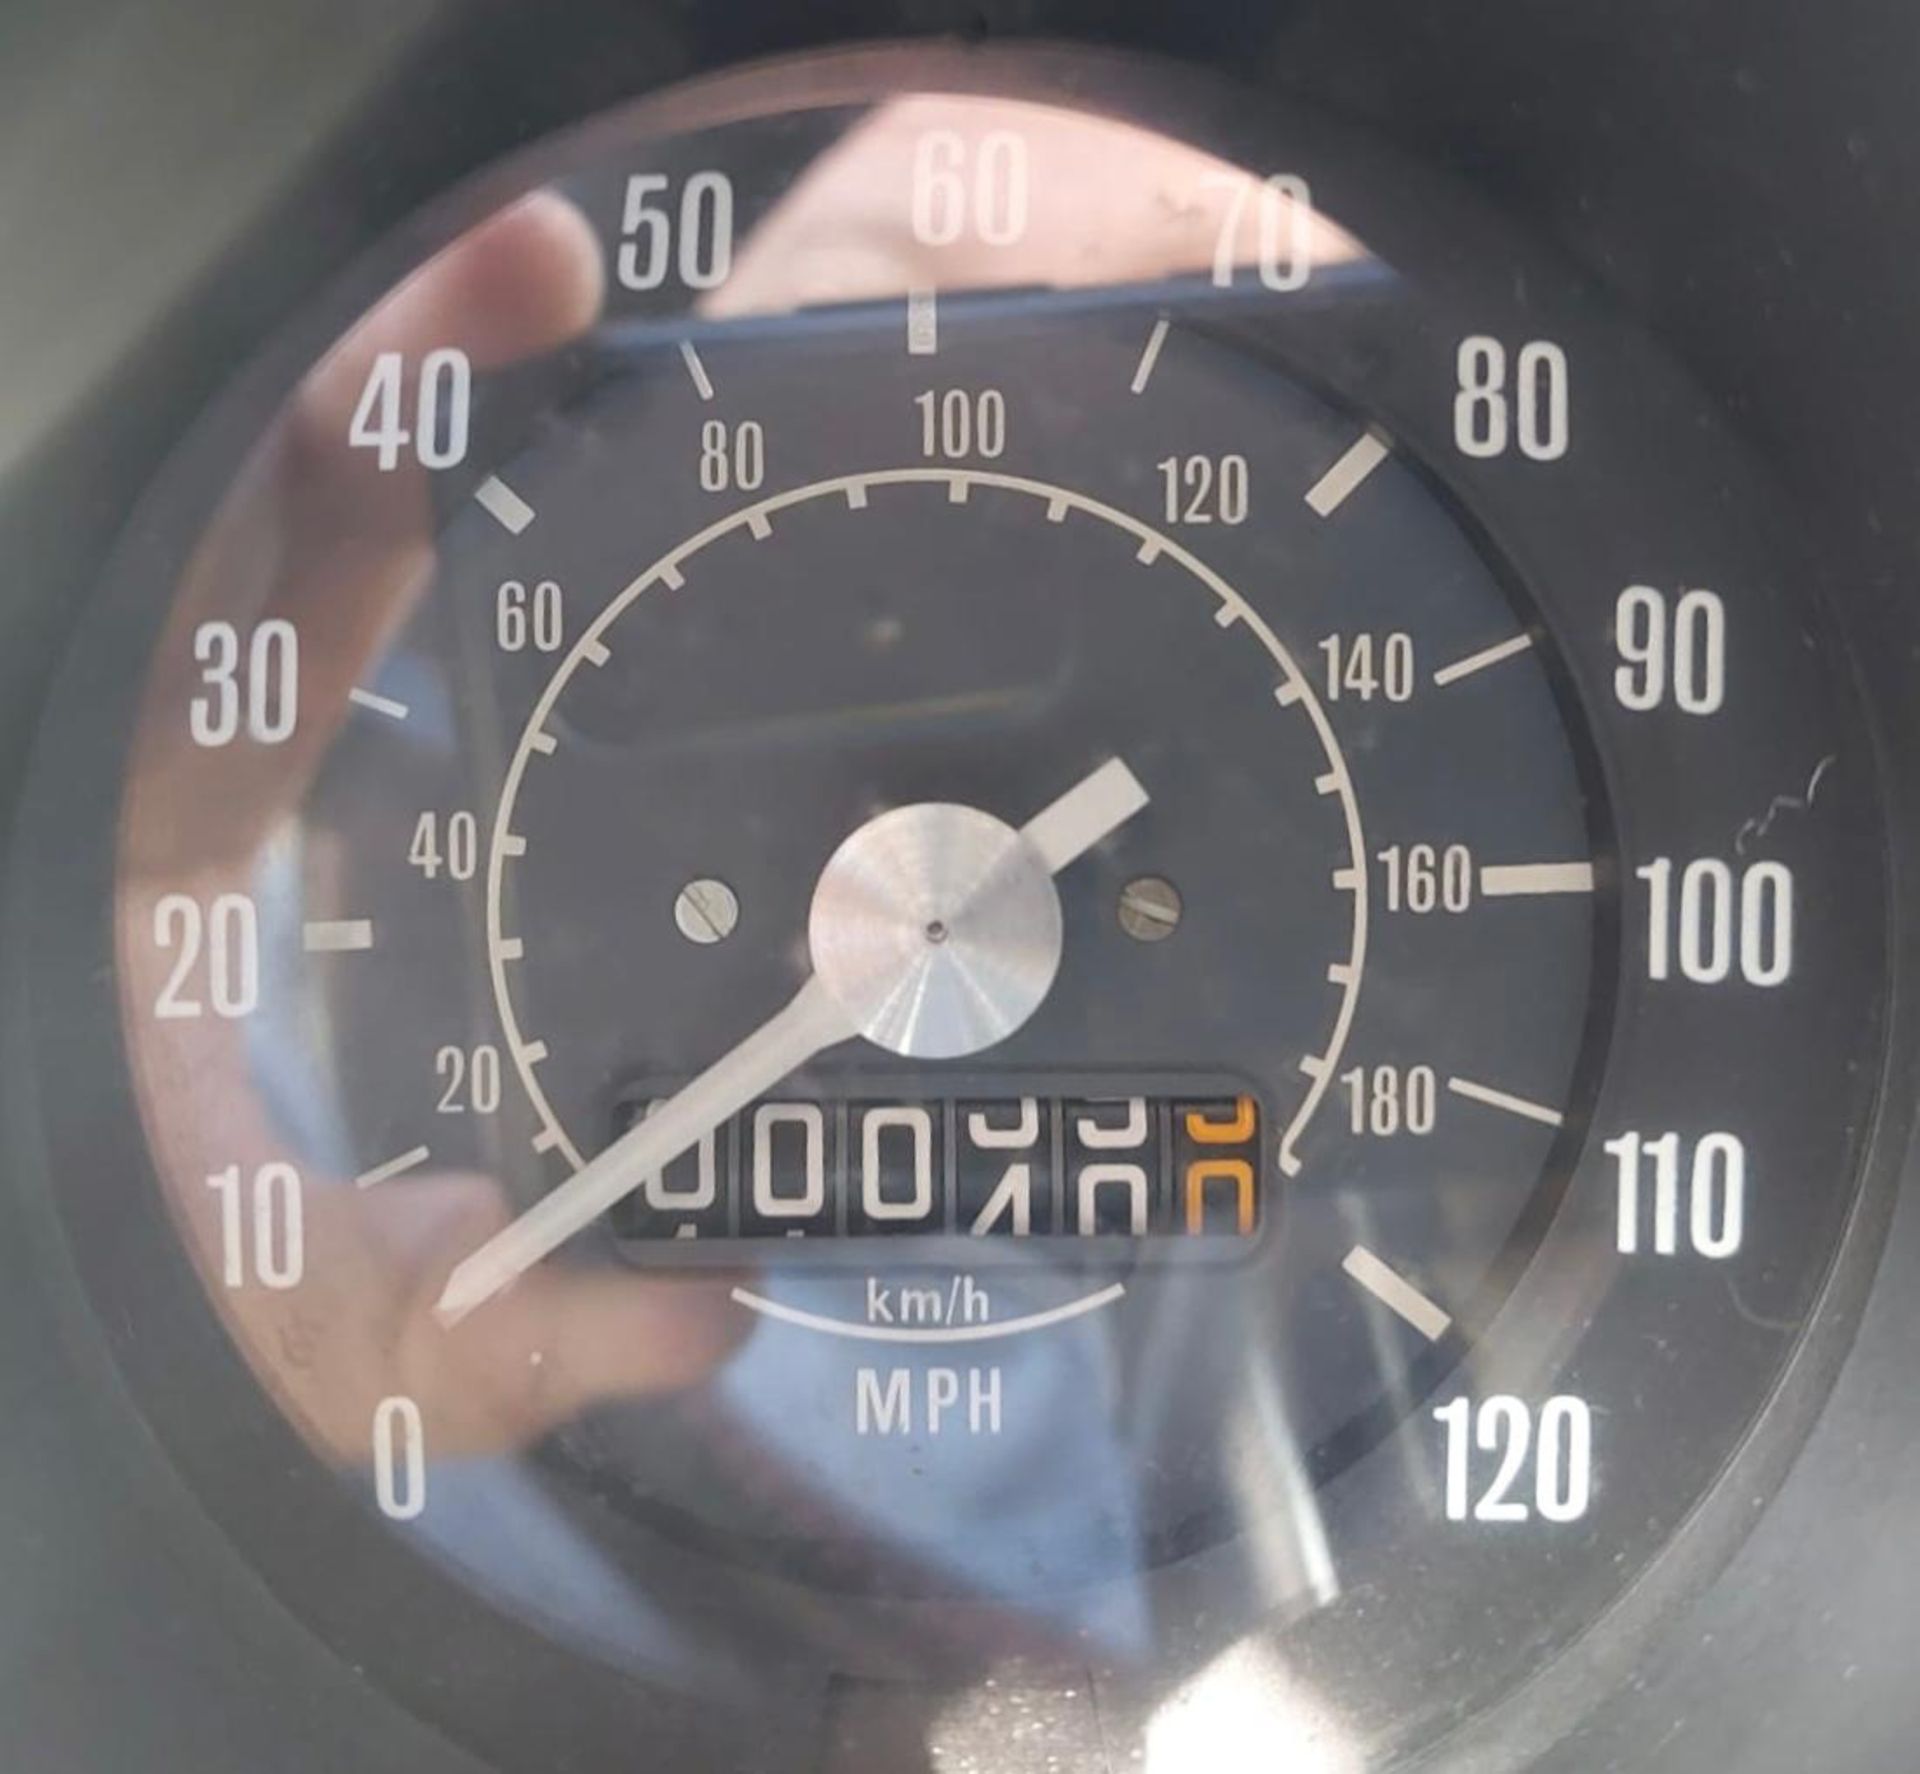 1984 Mini 25 - Only 39.9 miles from new - Image 2 of 52